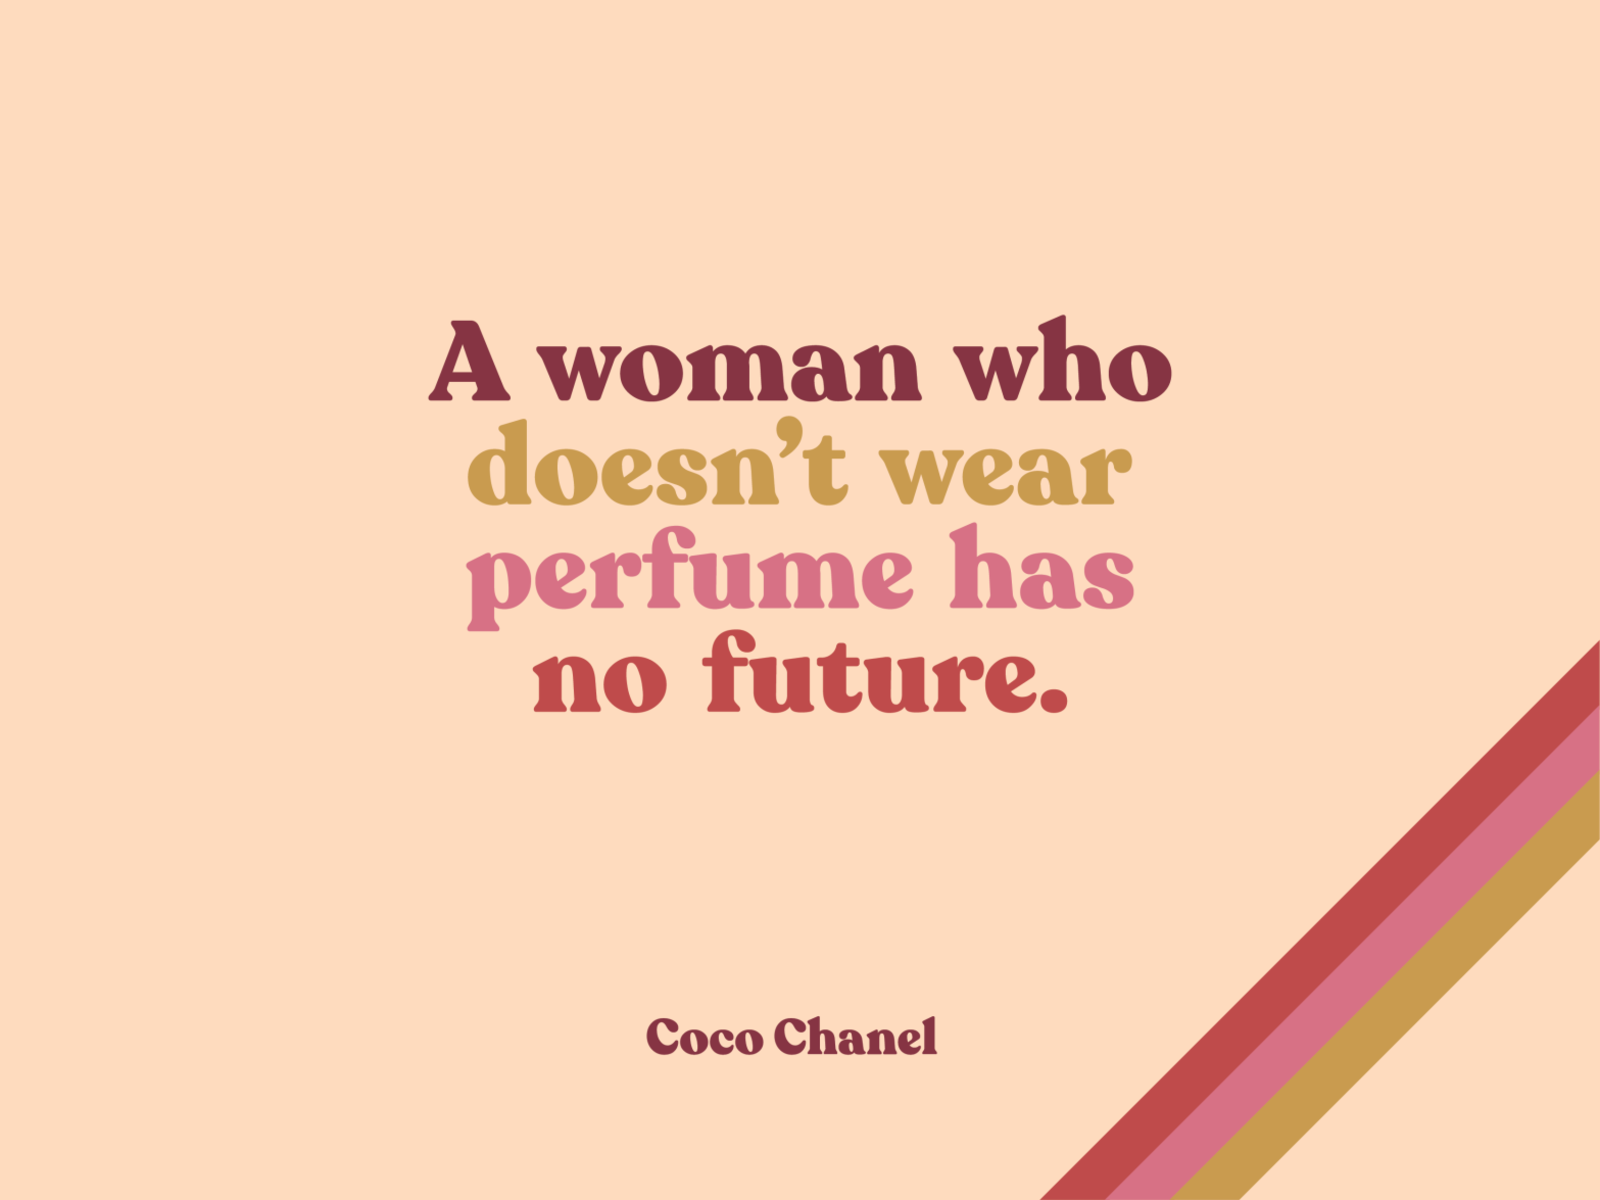 Coco Chanel Quotes on Twitter A woman who doesnt wear perfume has no  future  Coco Chanel httptco1ydtlIAPTr  Twitter